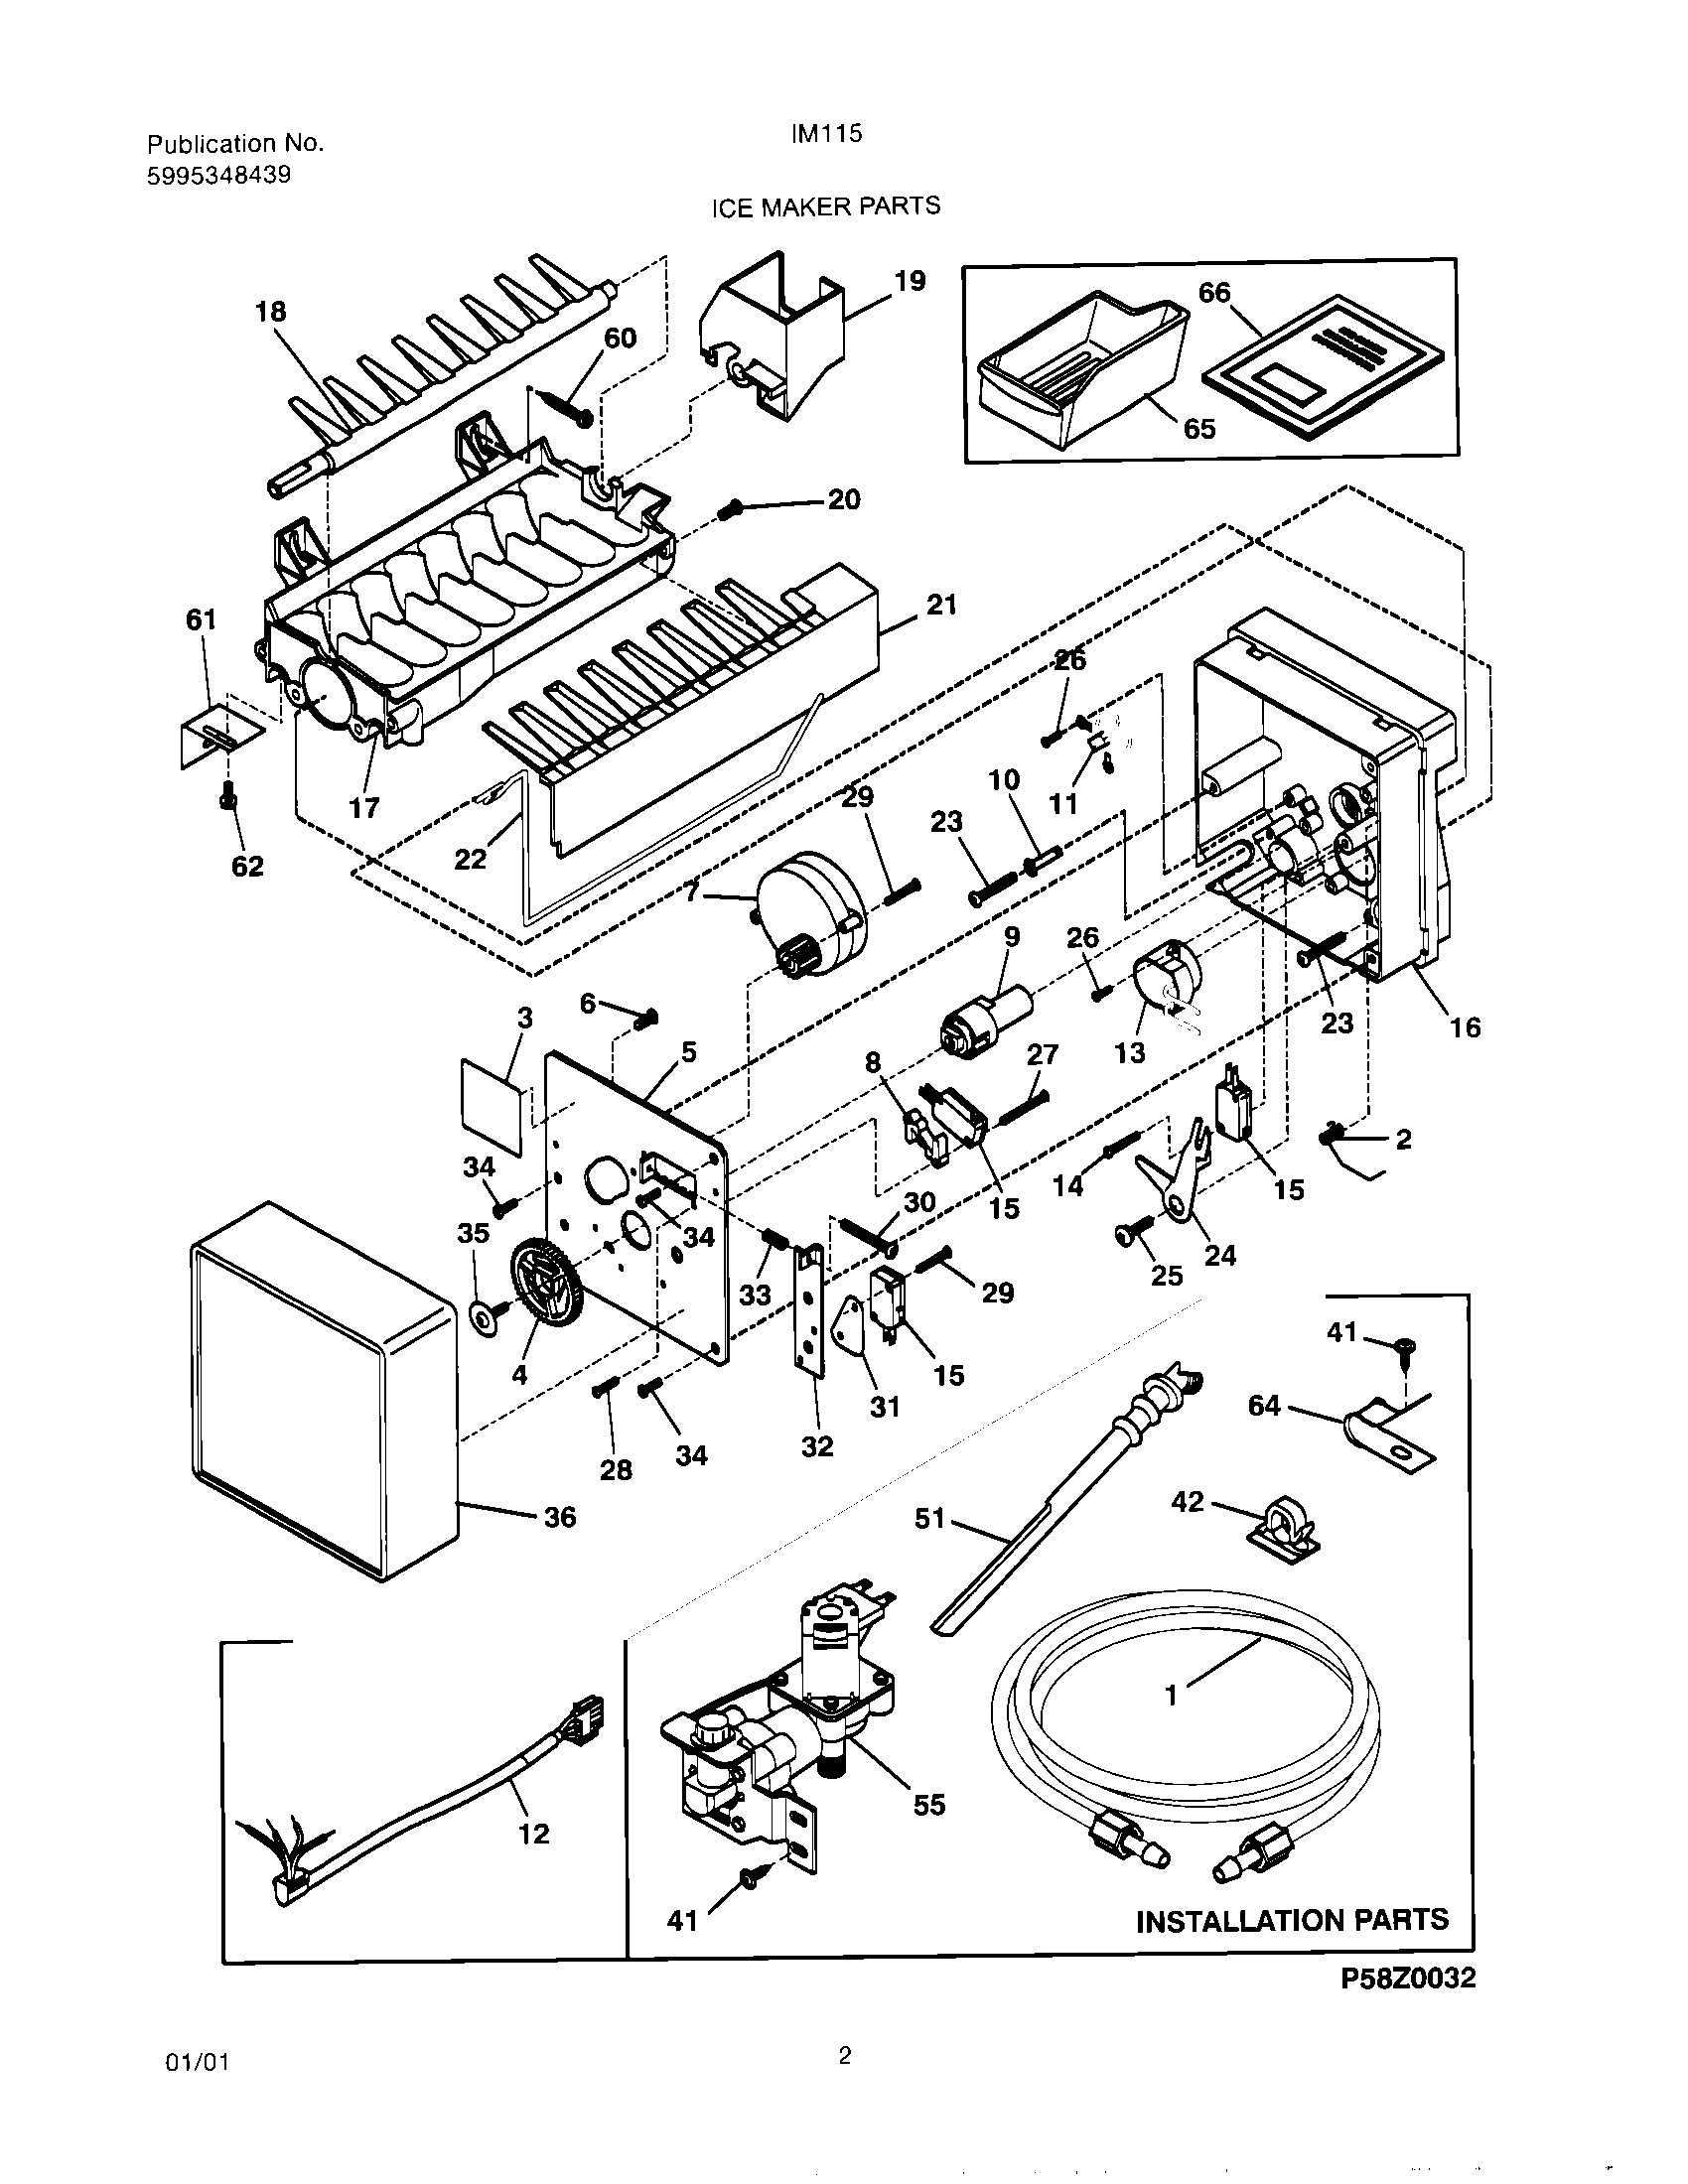 03 - ICE MAKER PARTS